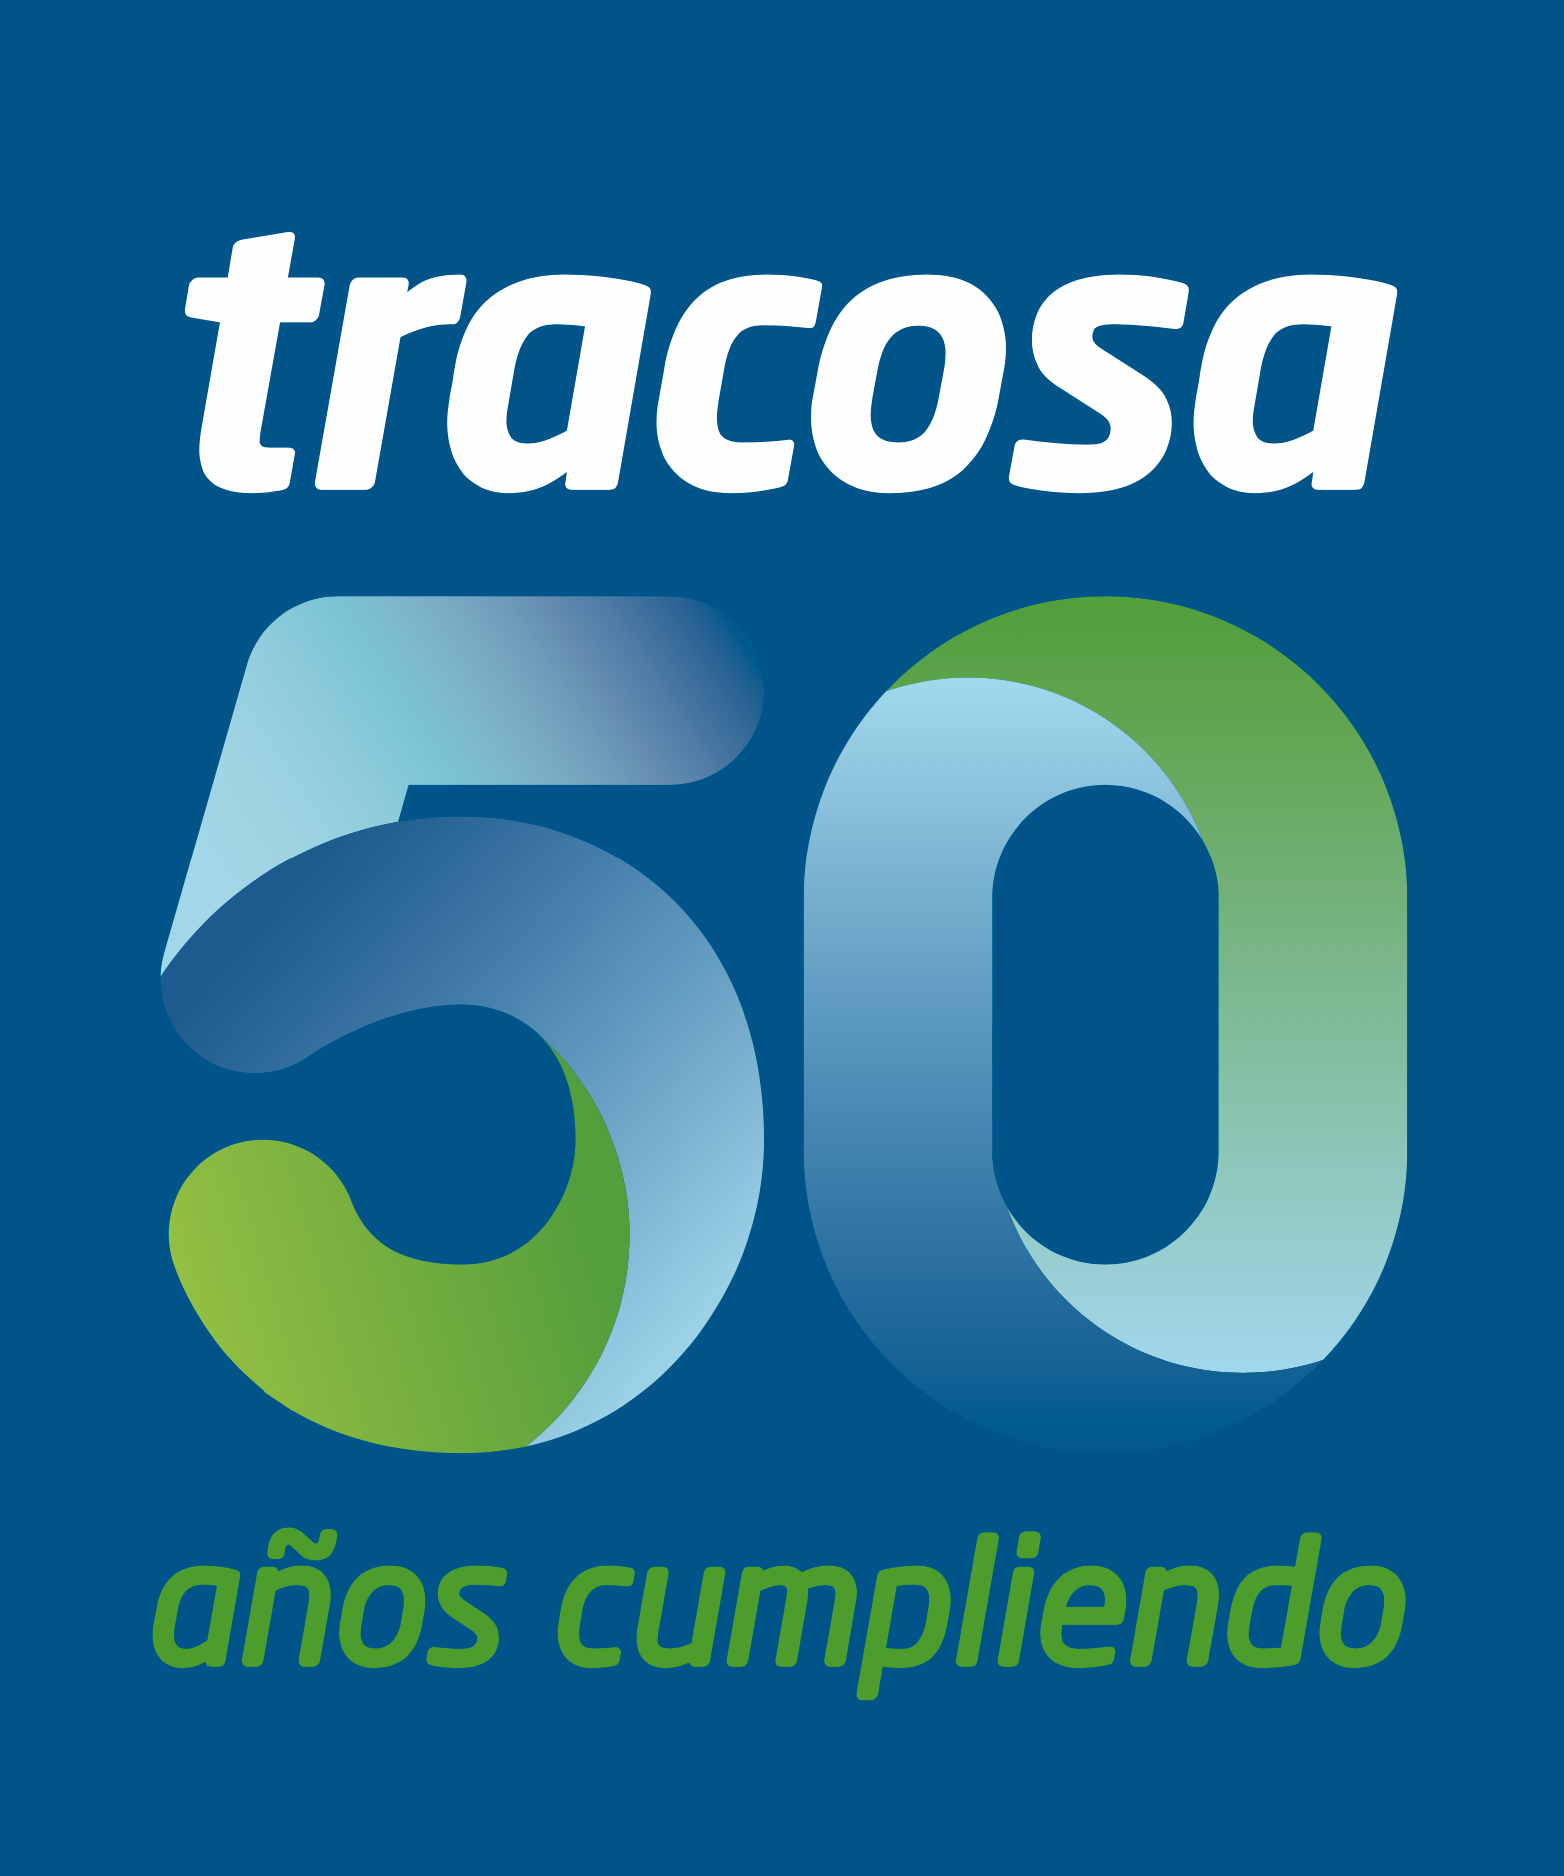 Tracosa will be turning fifty